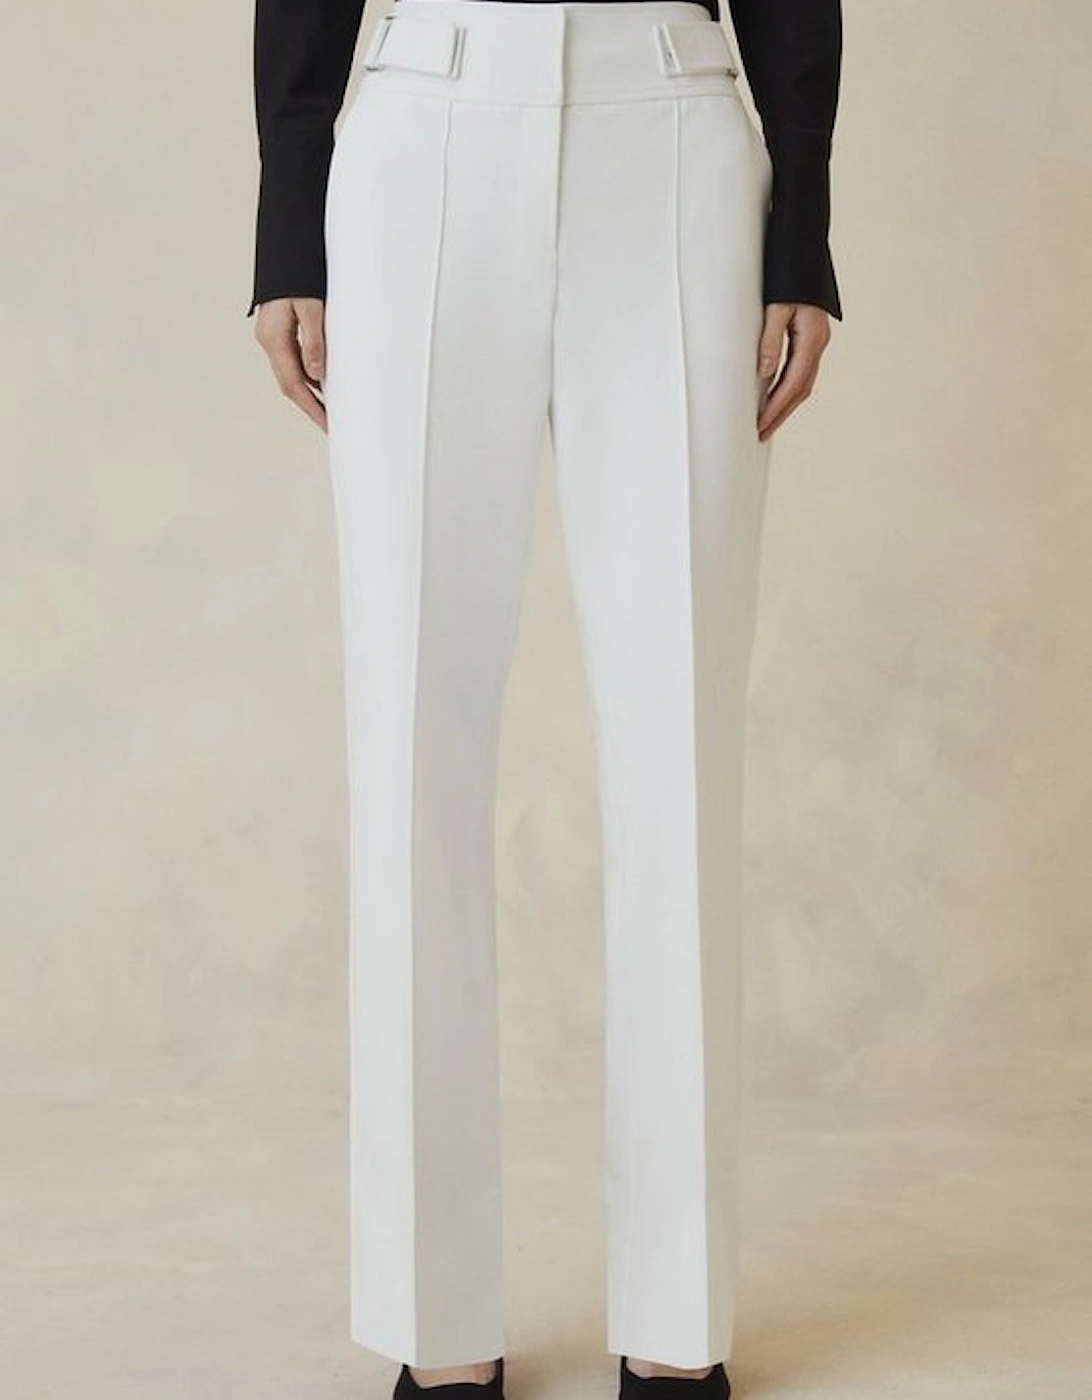 The Founder Compact Stretch Tab Waist Slim Leg Trousers